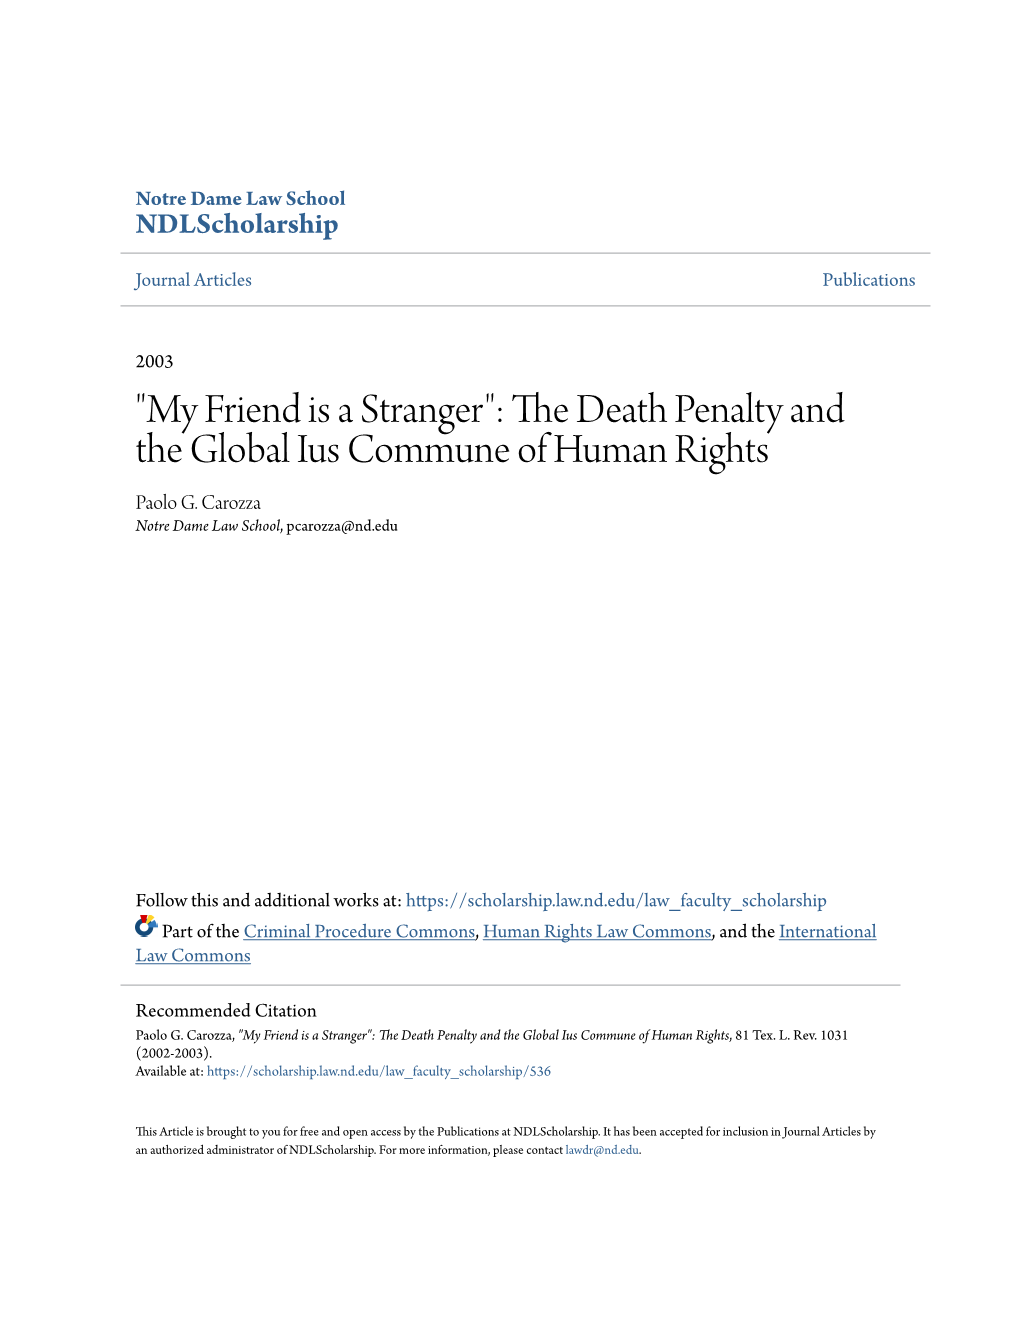 The Death Penalty and the Global Ius Commune of Human Rights, 81 Tex